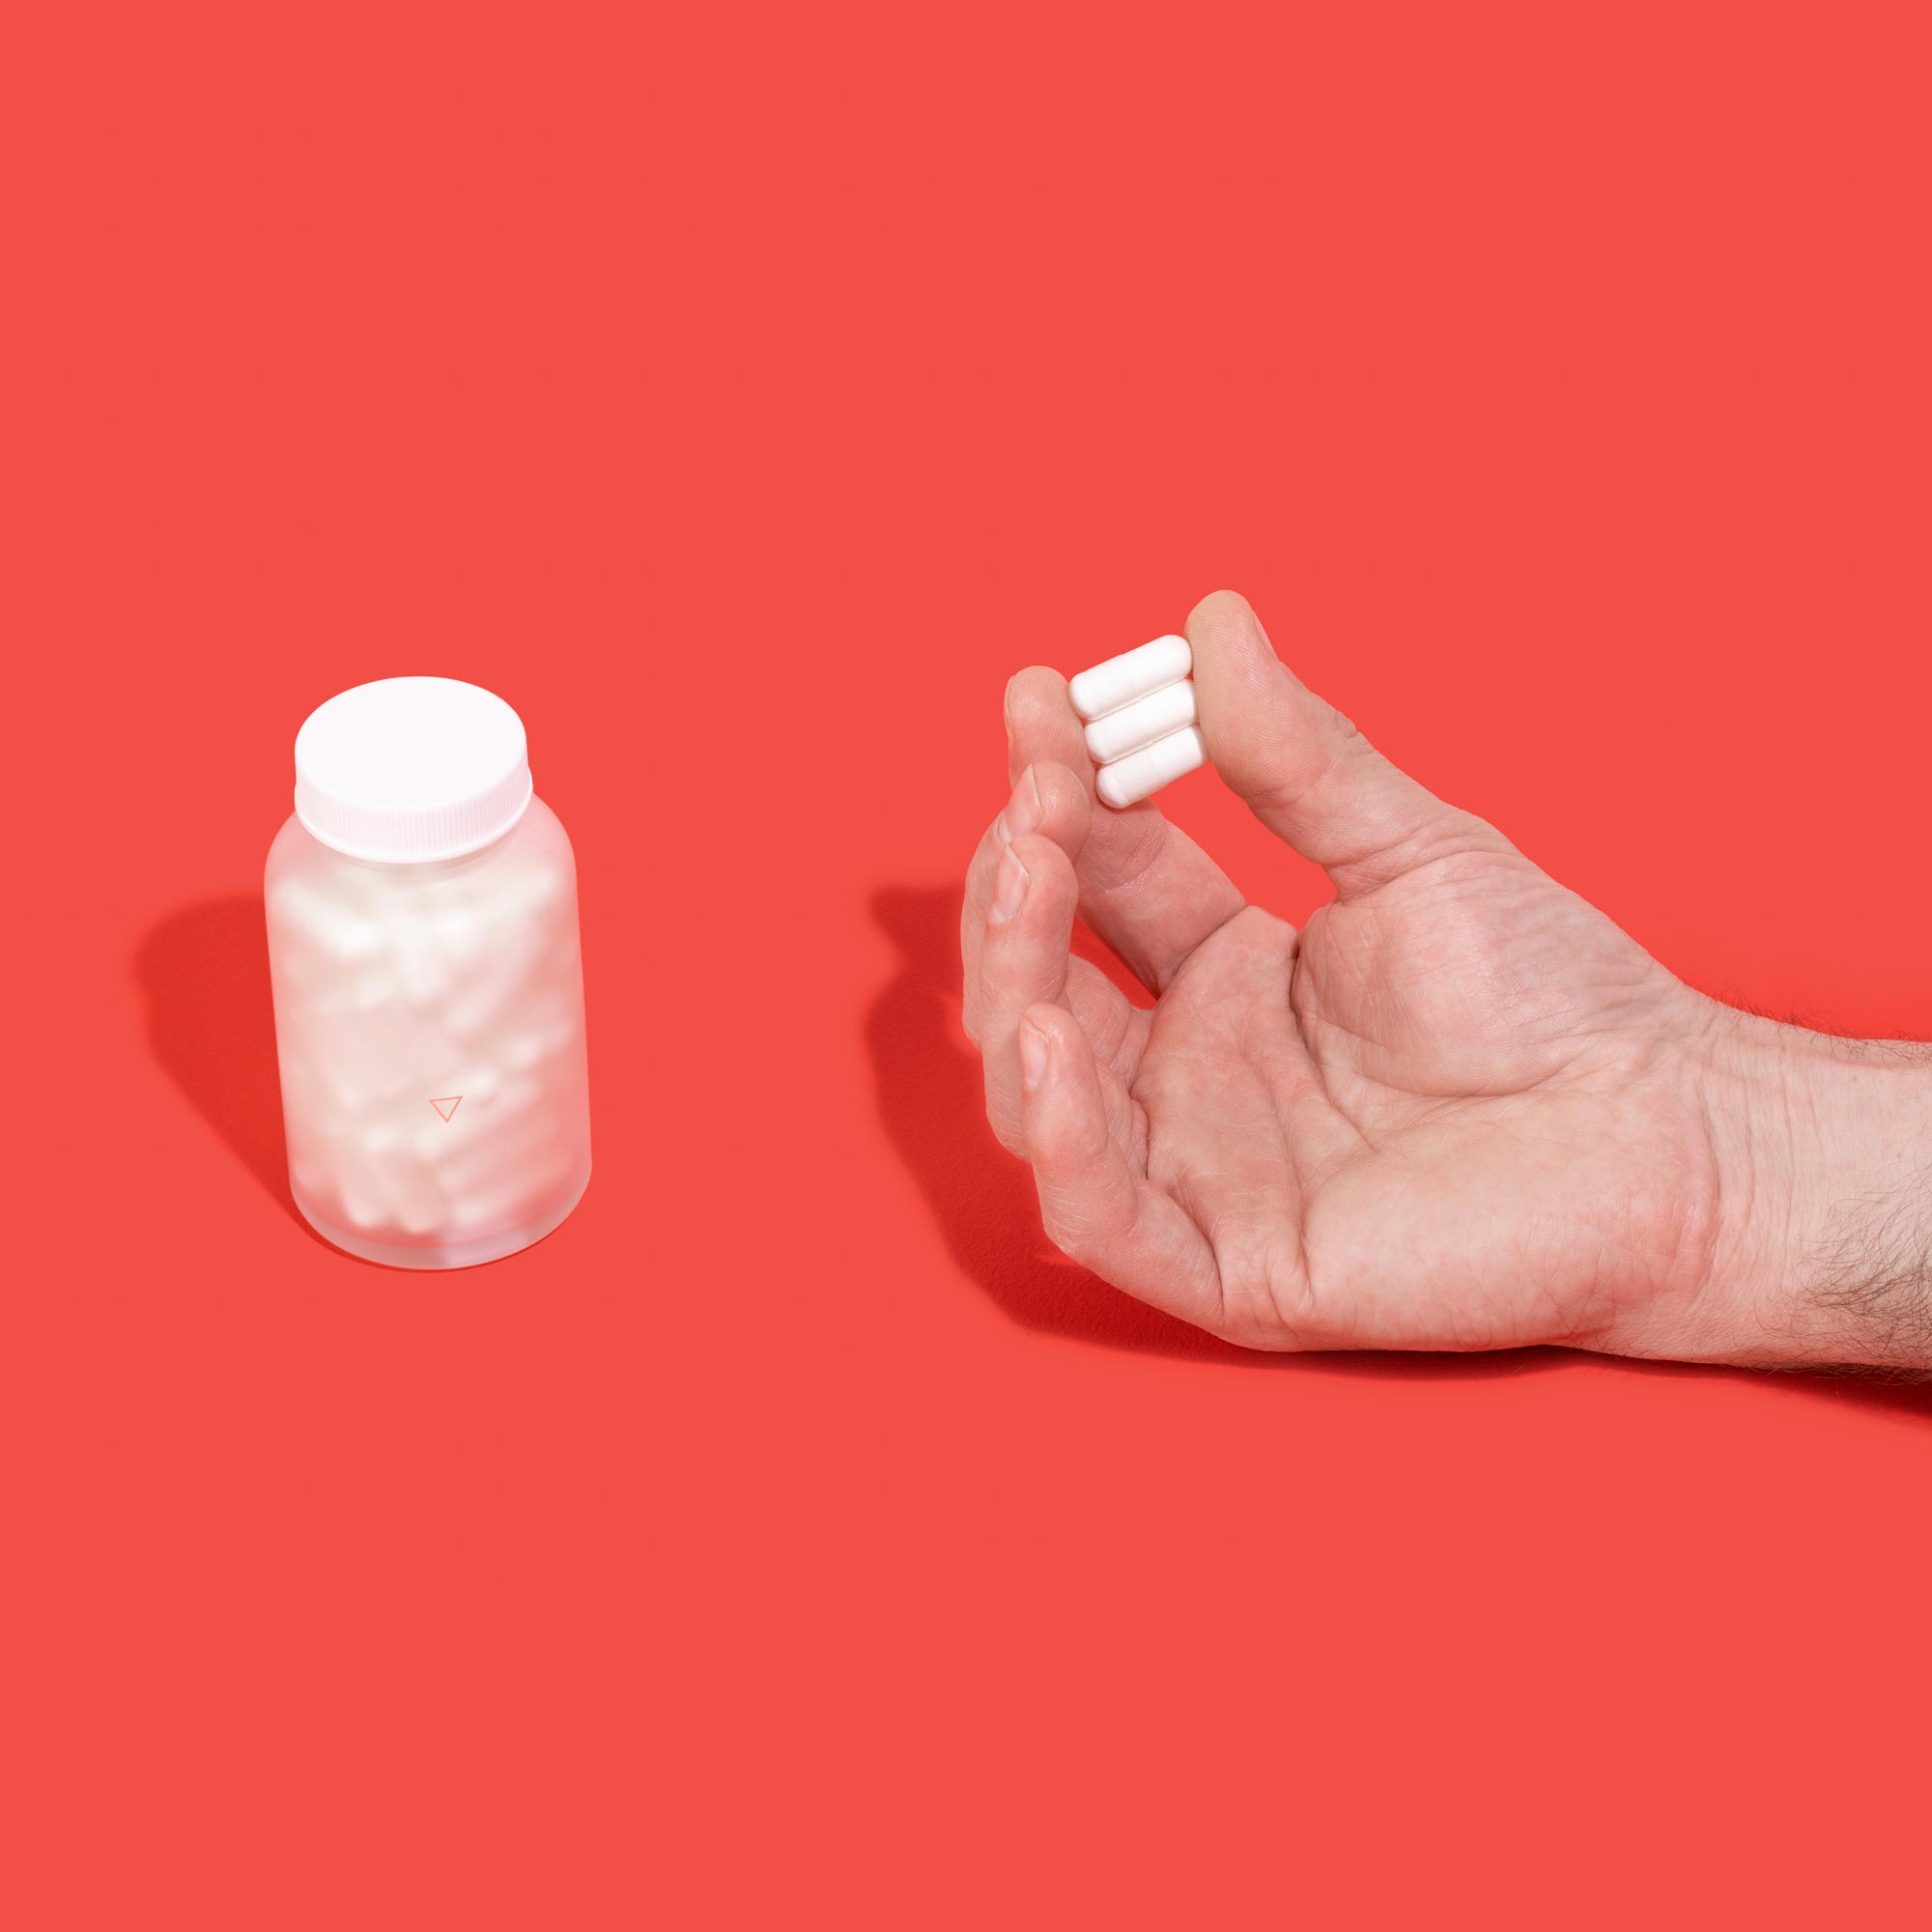 Hand holding lysine capsules next to jar on red background